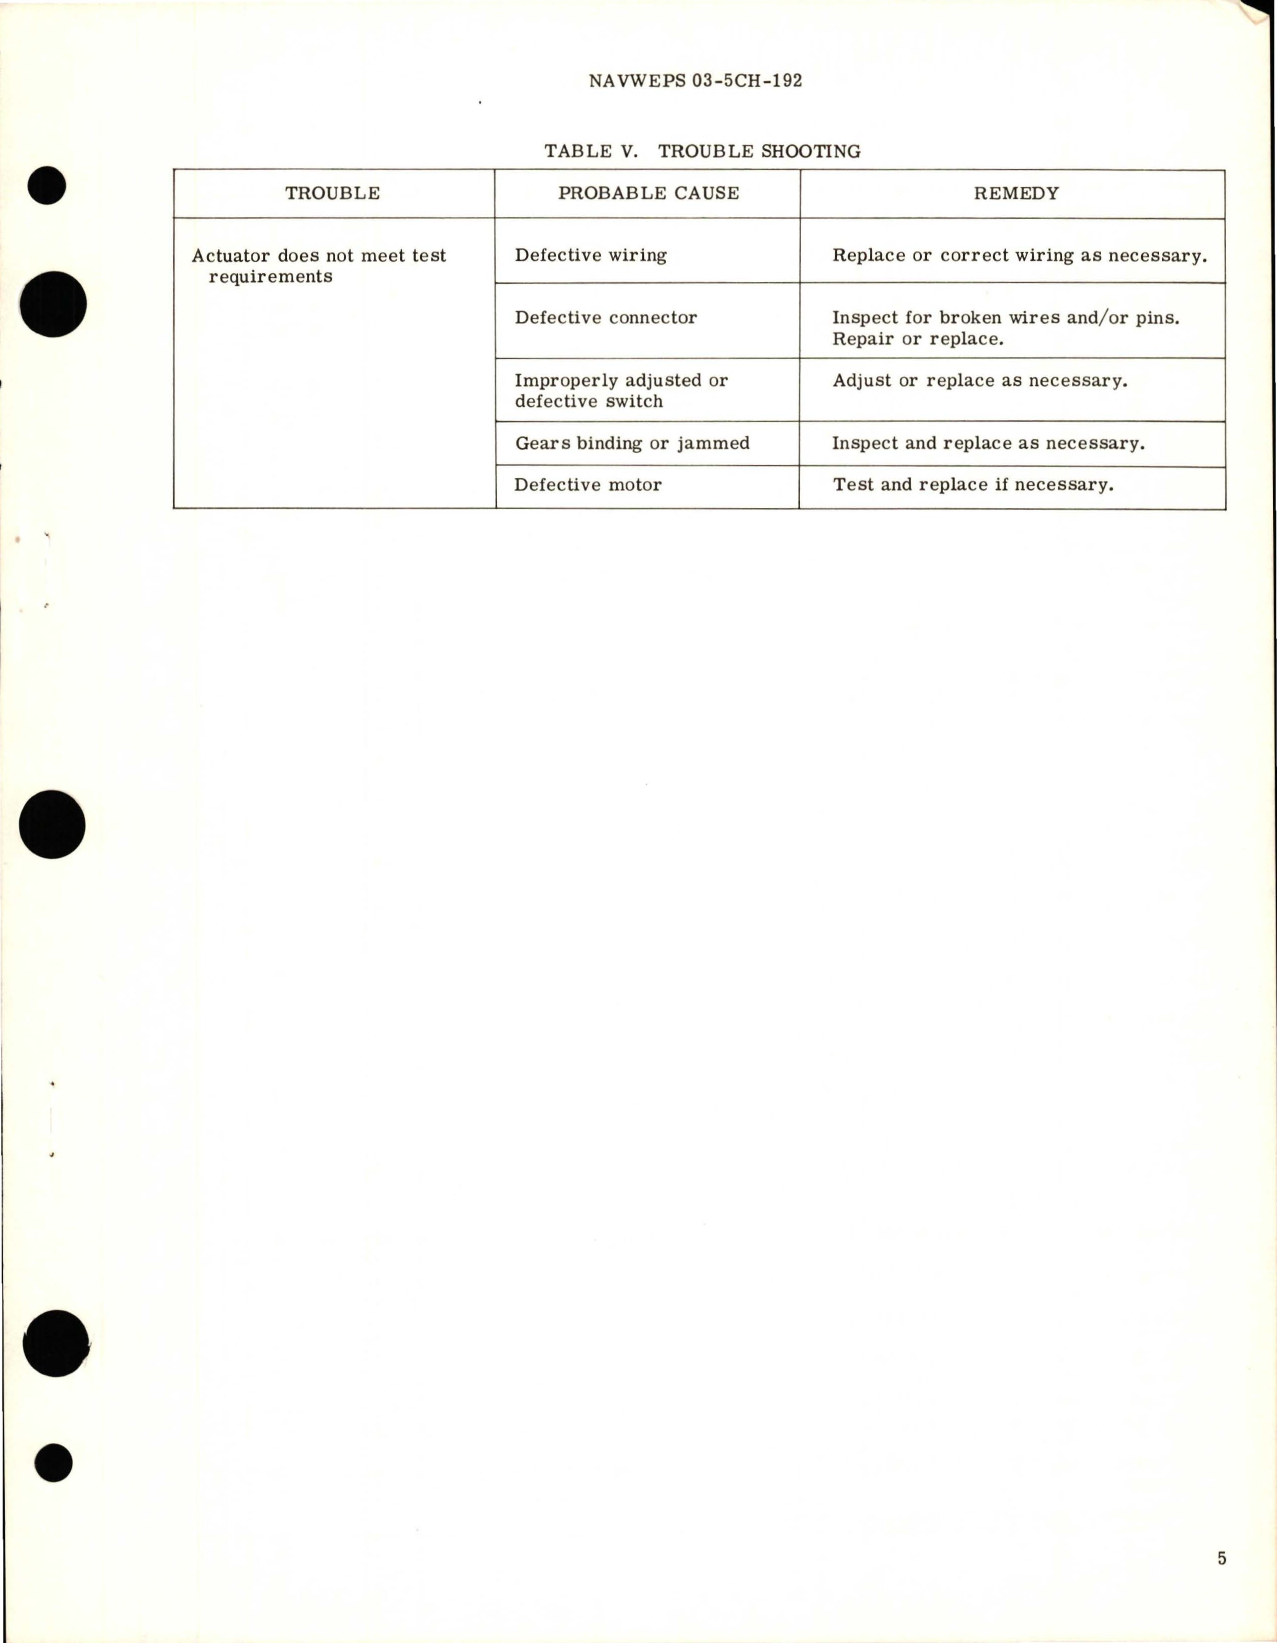 Sample page 5 from AirCorps Library document: Overhaul Instructions with Parts Breakdown for Electromechanical Rotary Actuators - Part 700200